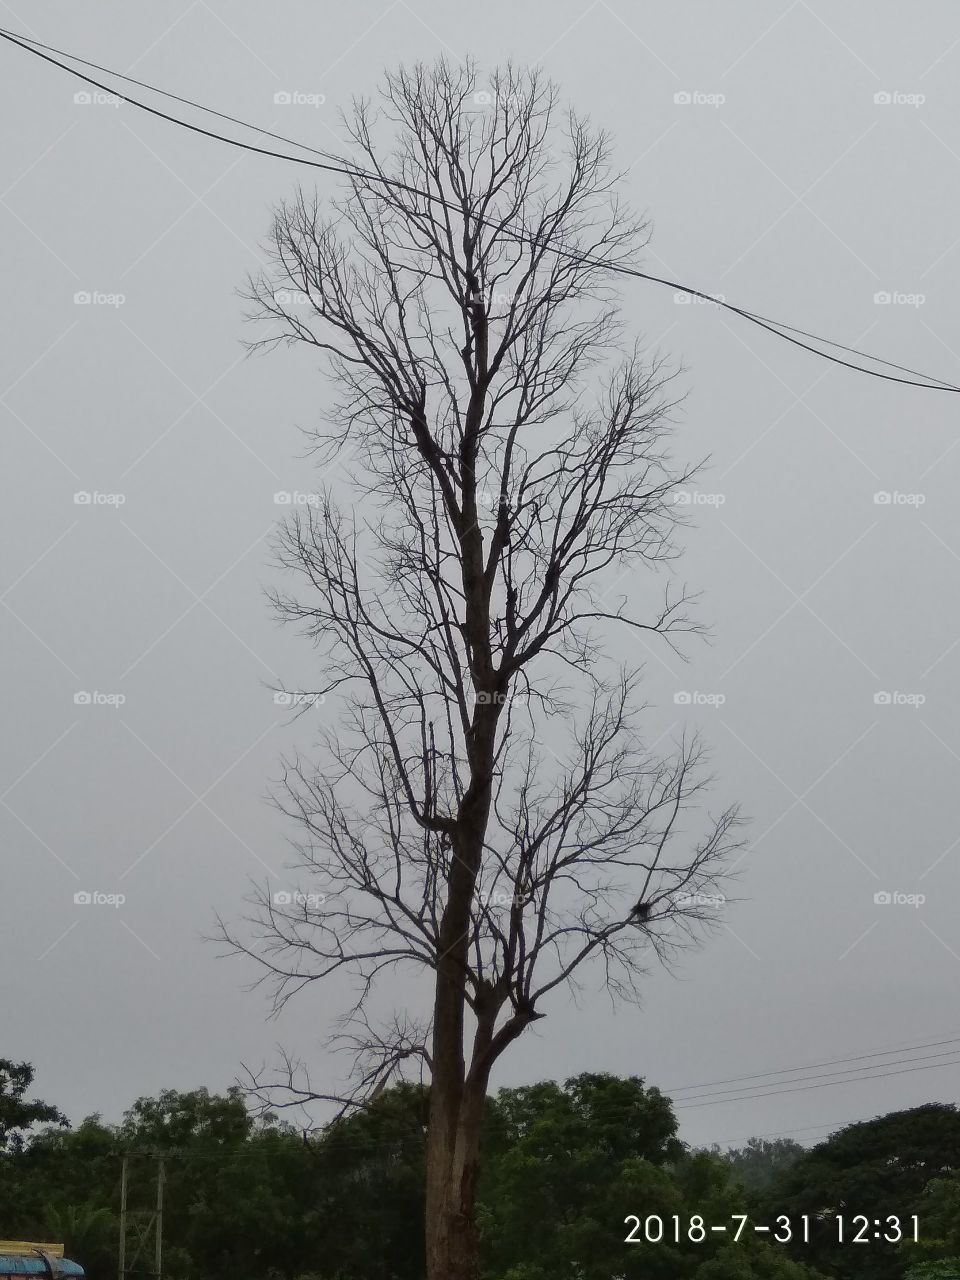 this is a big tree without leaf